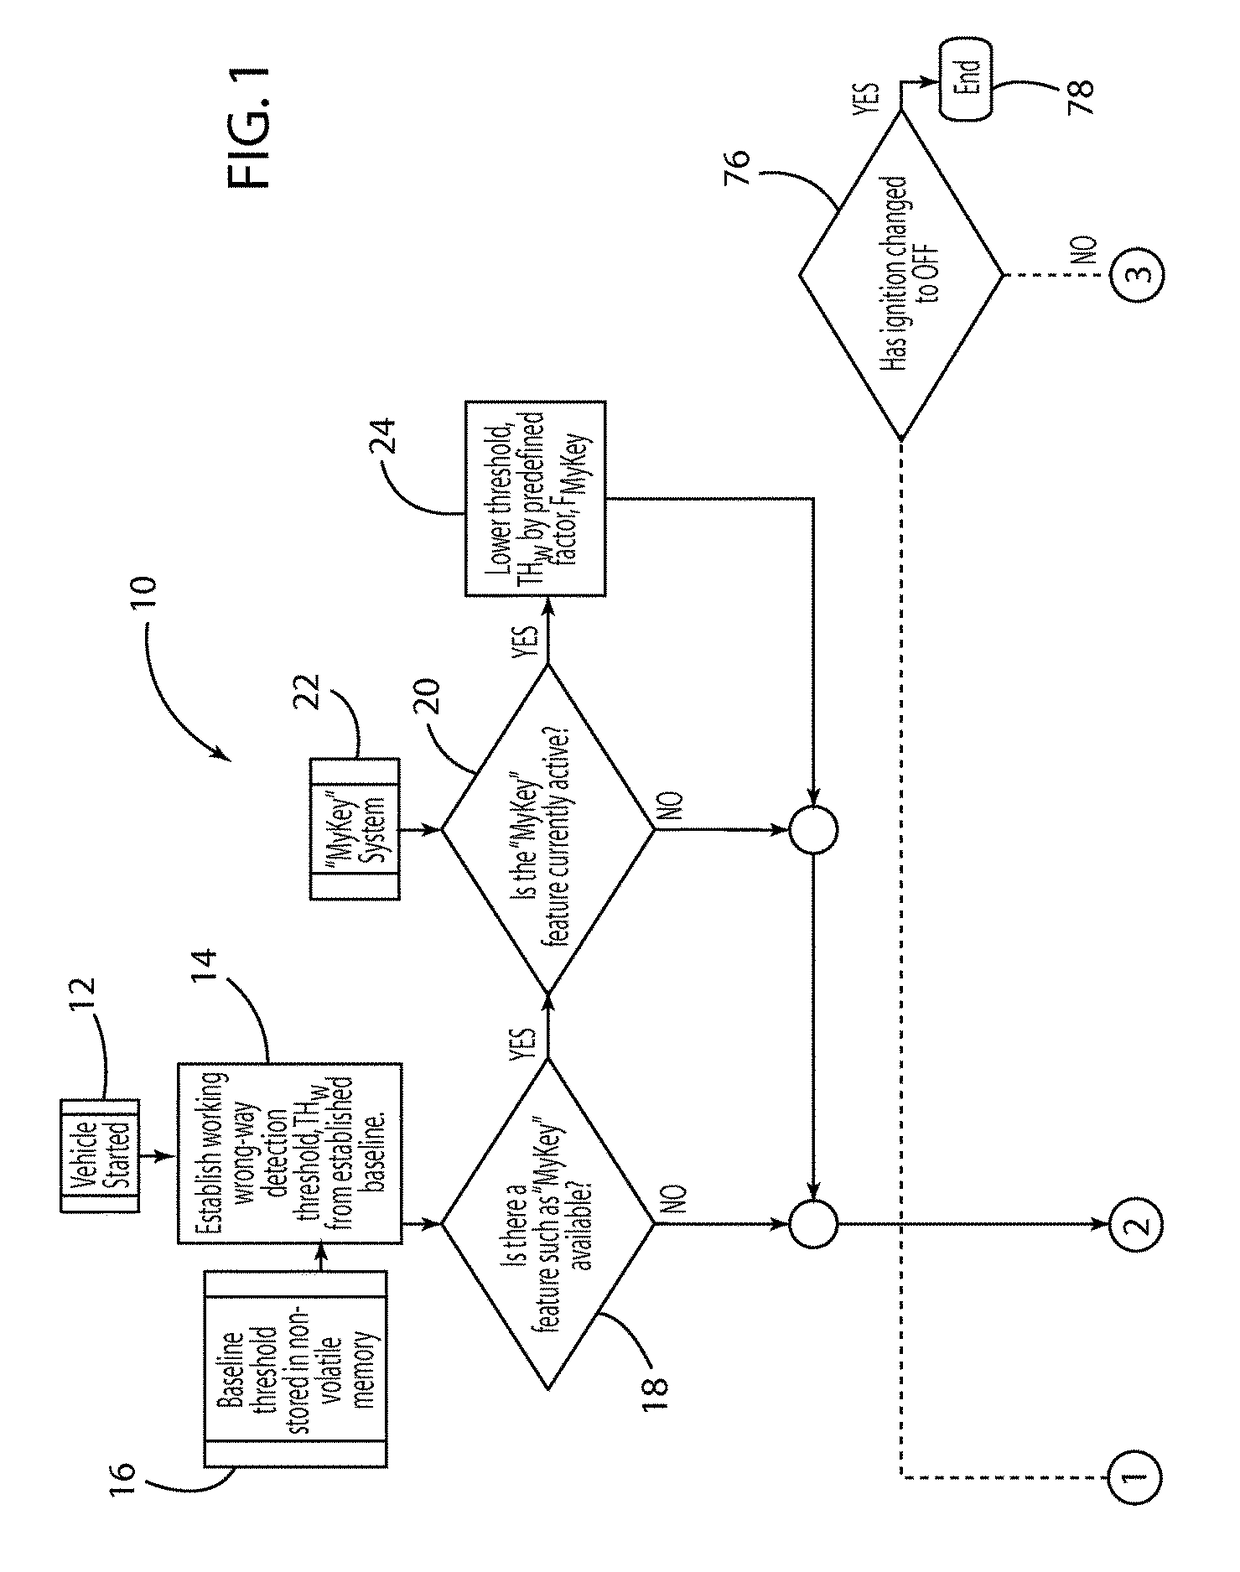 System and method for improving vehicle wrong-way detection